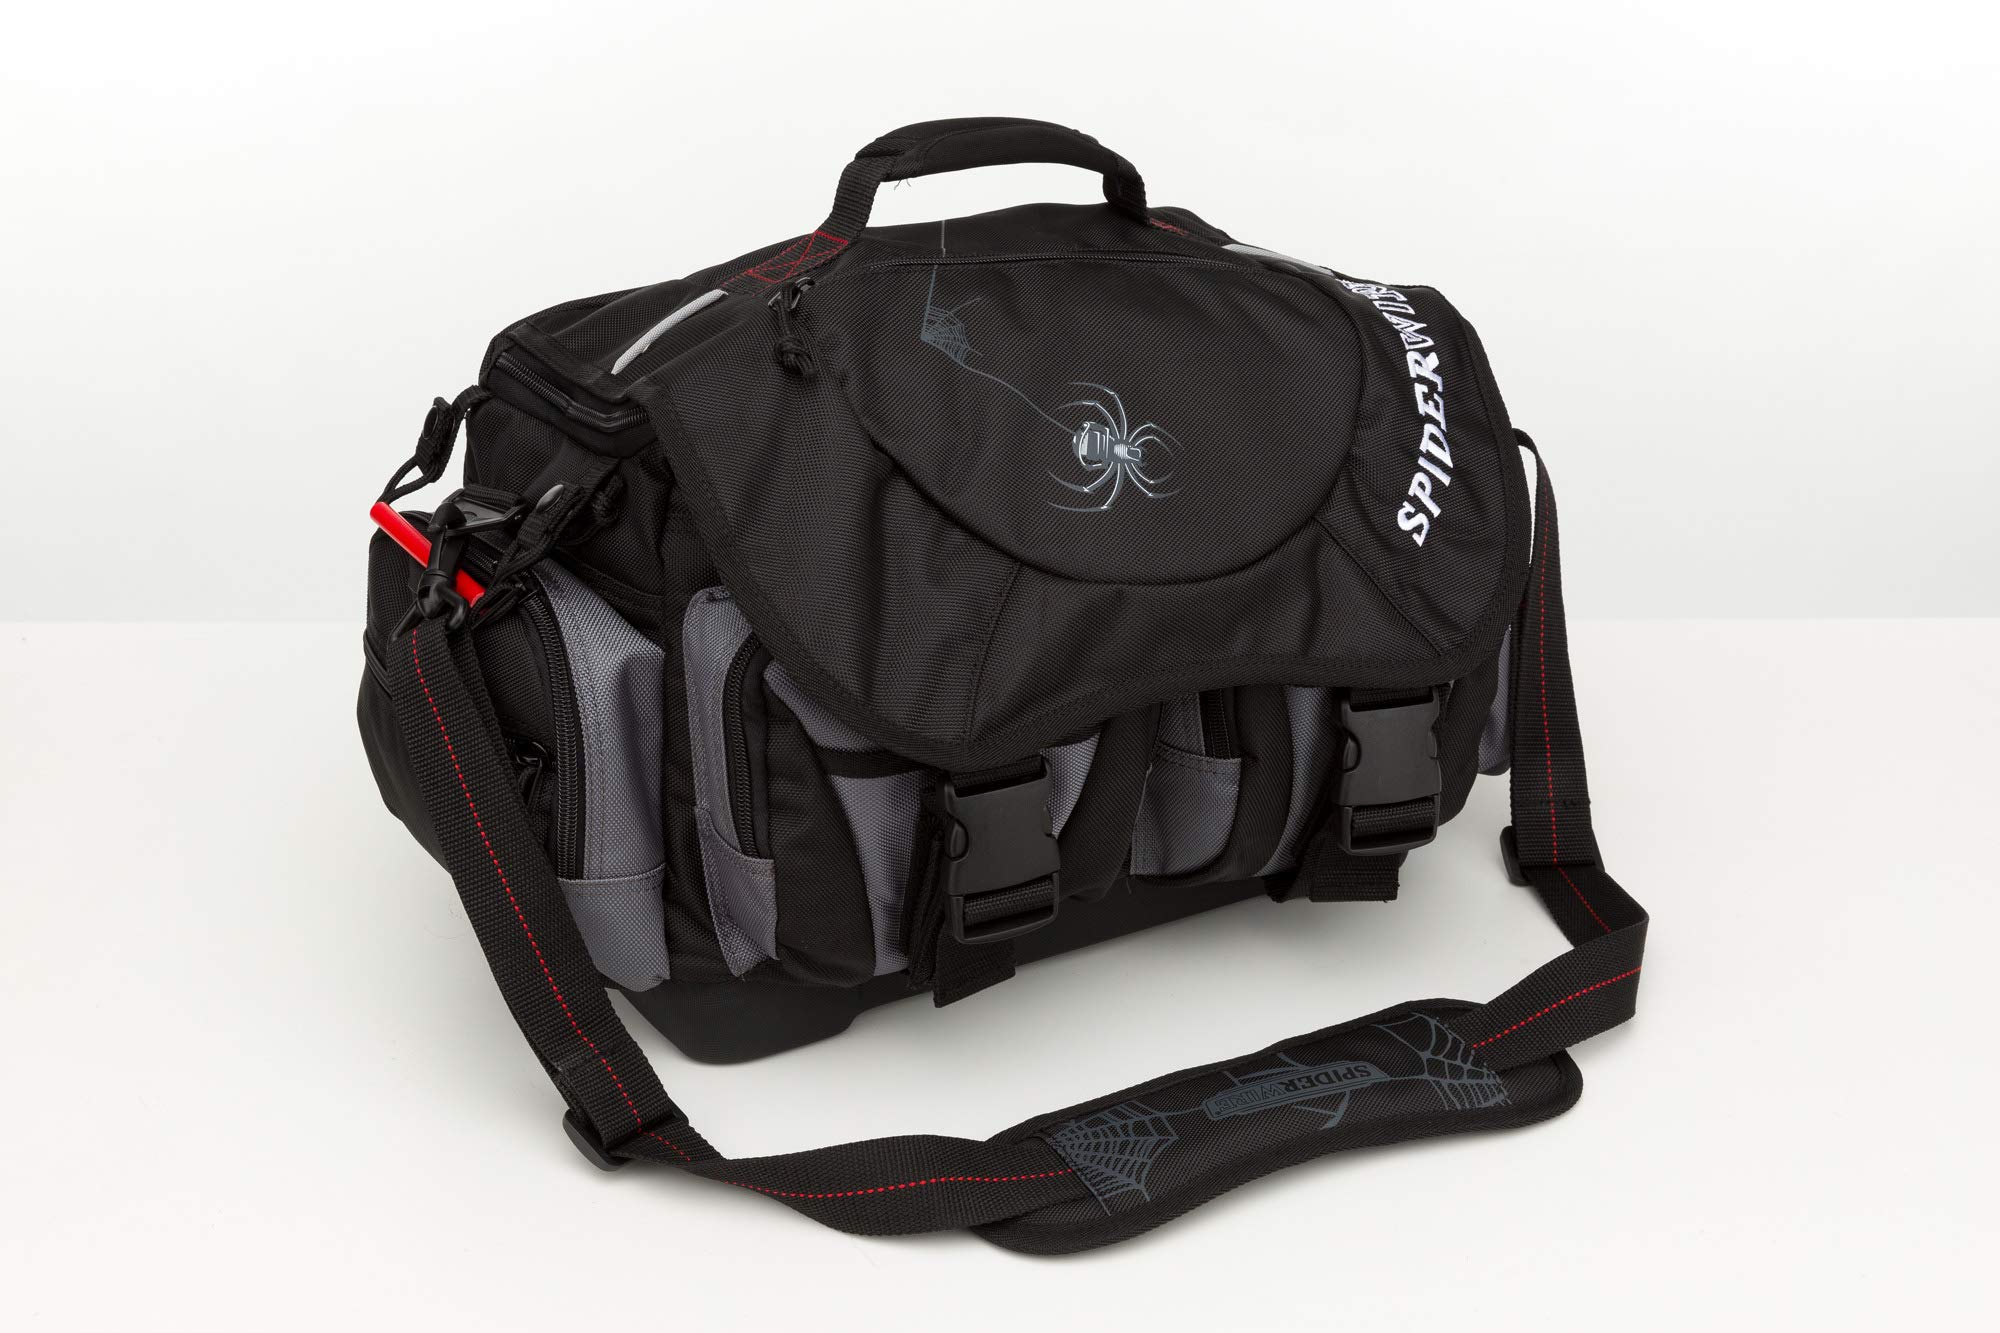 Spiderwire Wolf Tackle Bag, 38.8-Liter - image 2 of 9